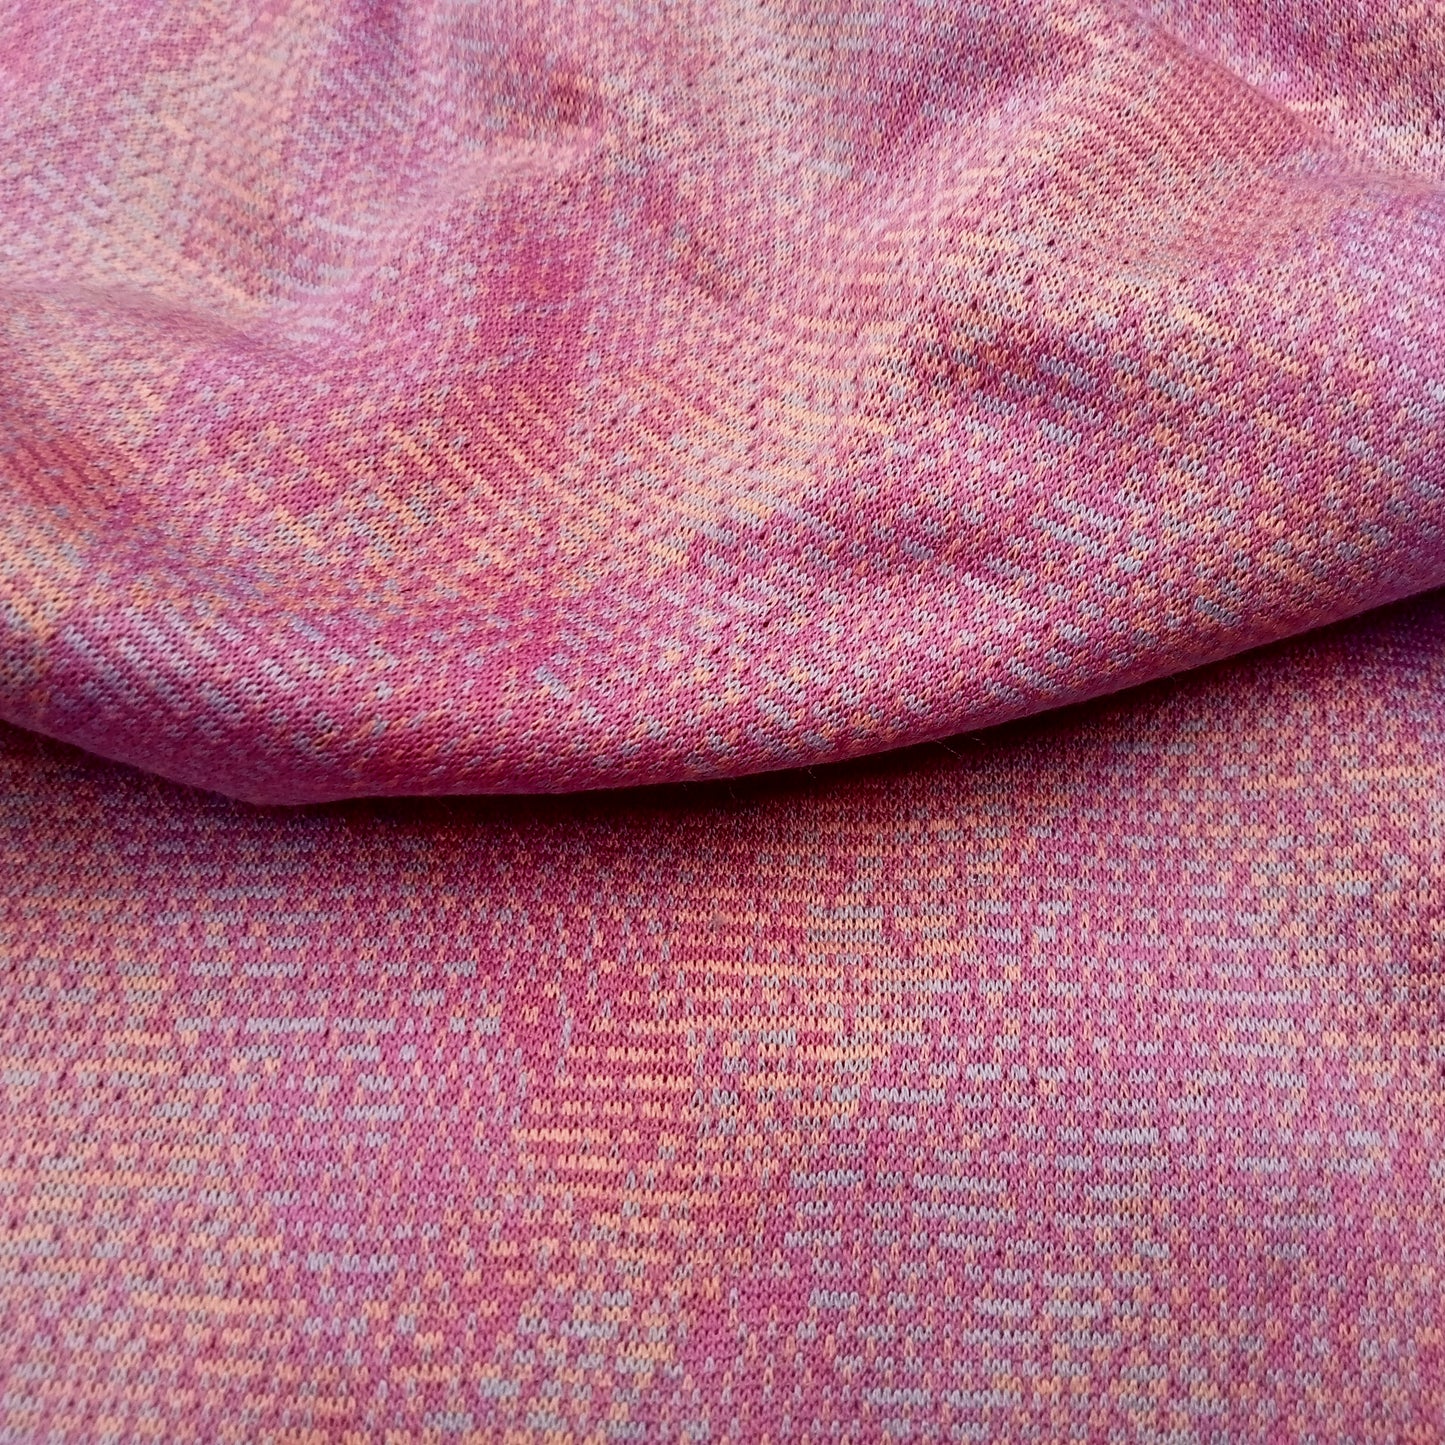 Fleck- cotton knit fabric - sold by 1/2mtr